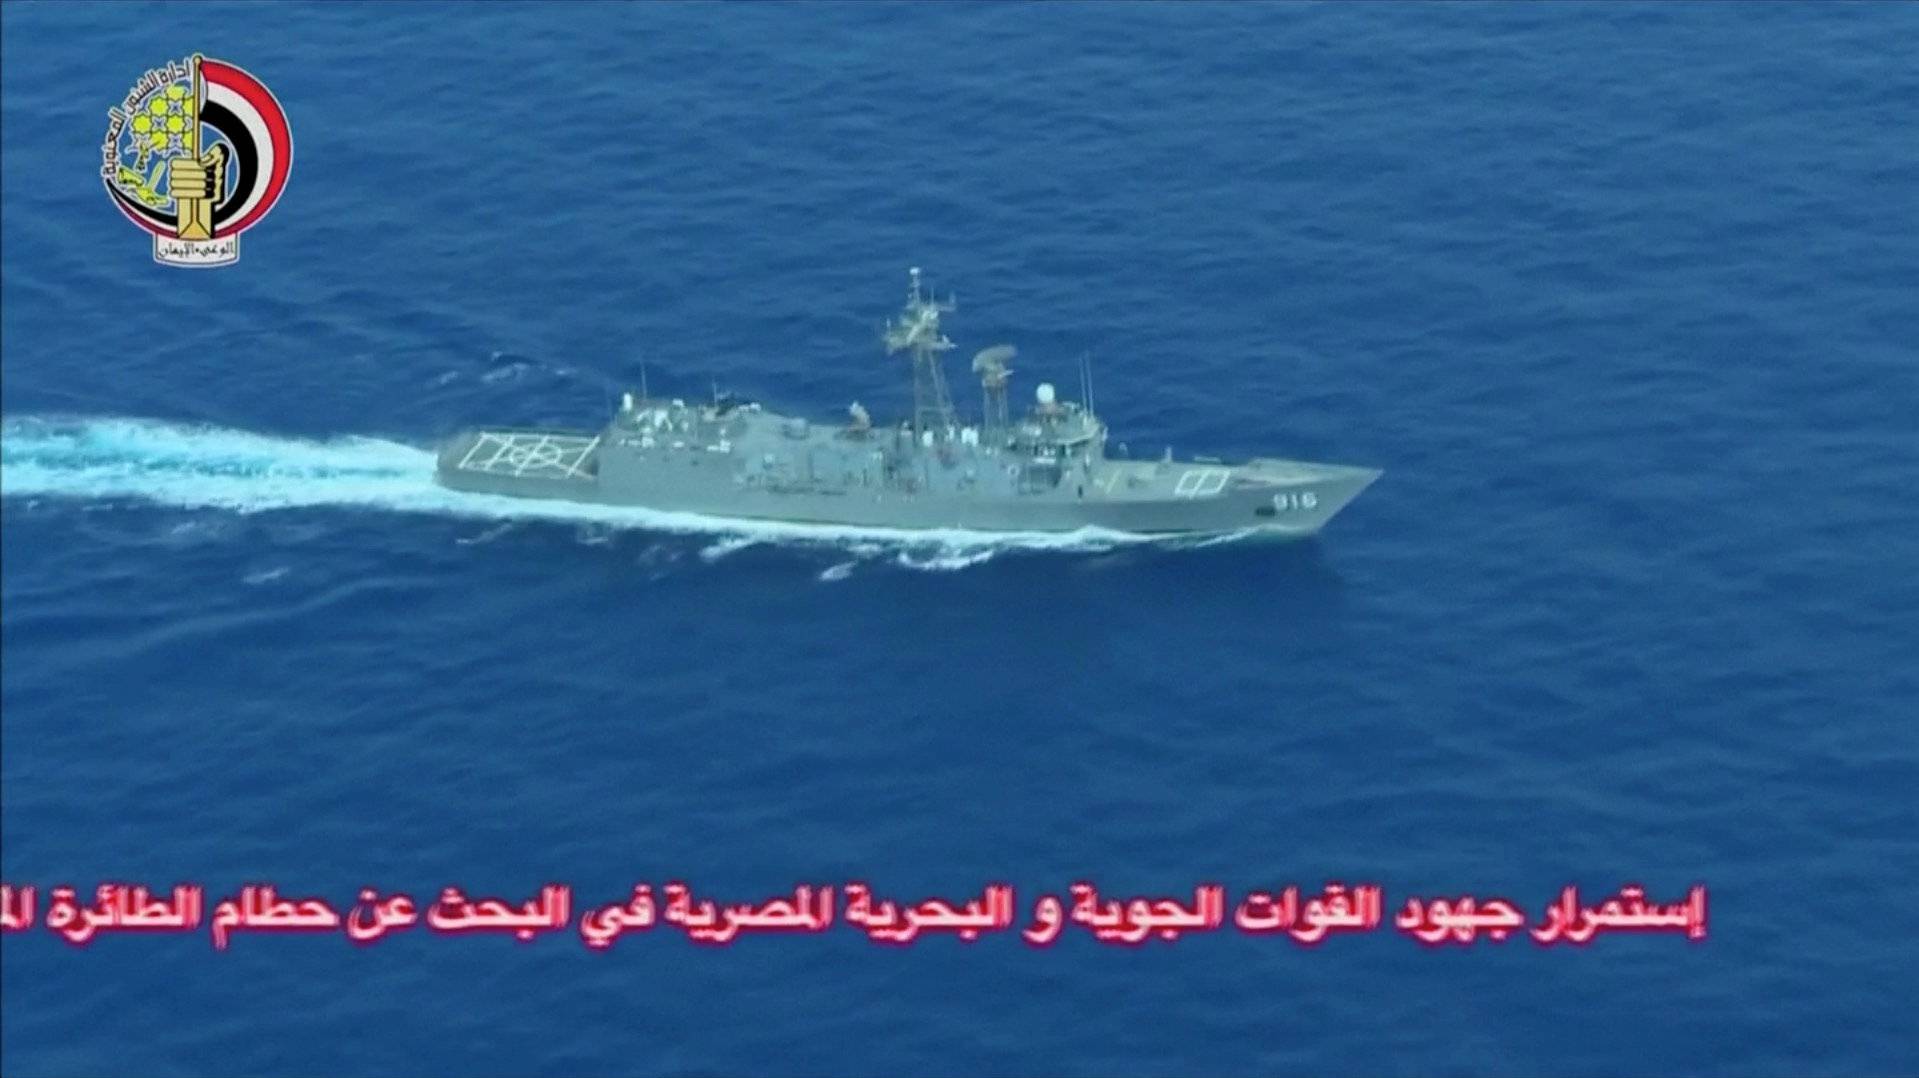 An Egyptian military search vessel takes part in a search operation for the EgyptAir plane that disappeared in the Mediterranean Sea, in this still image taken from video